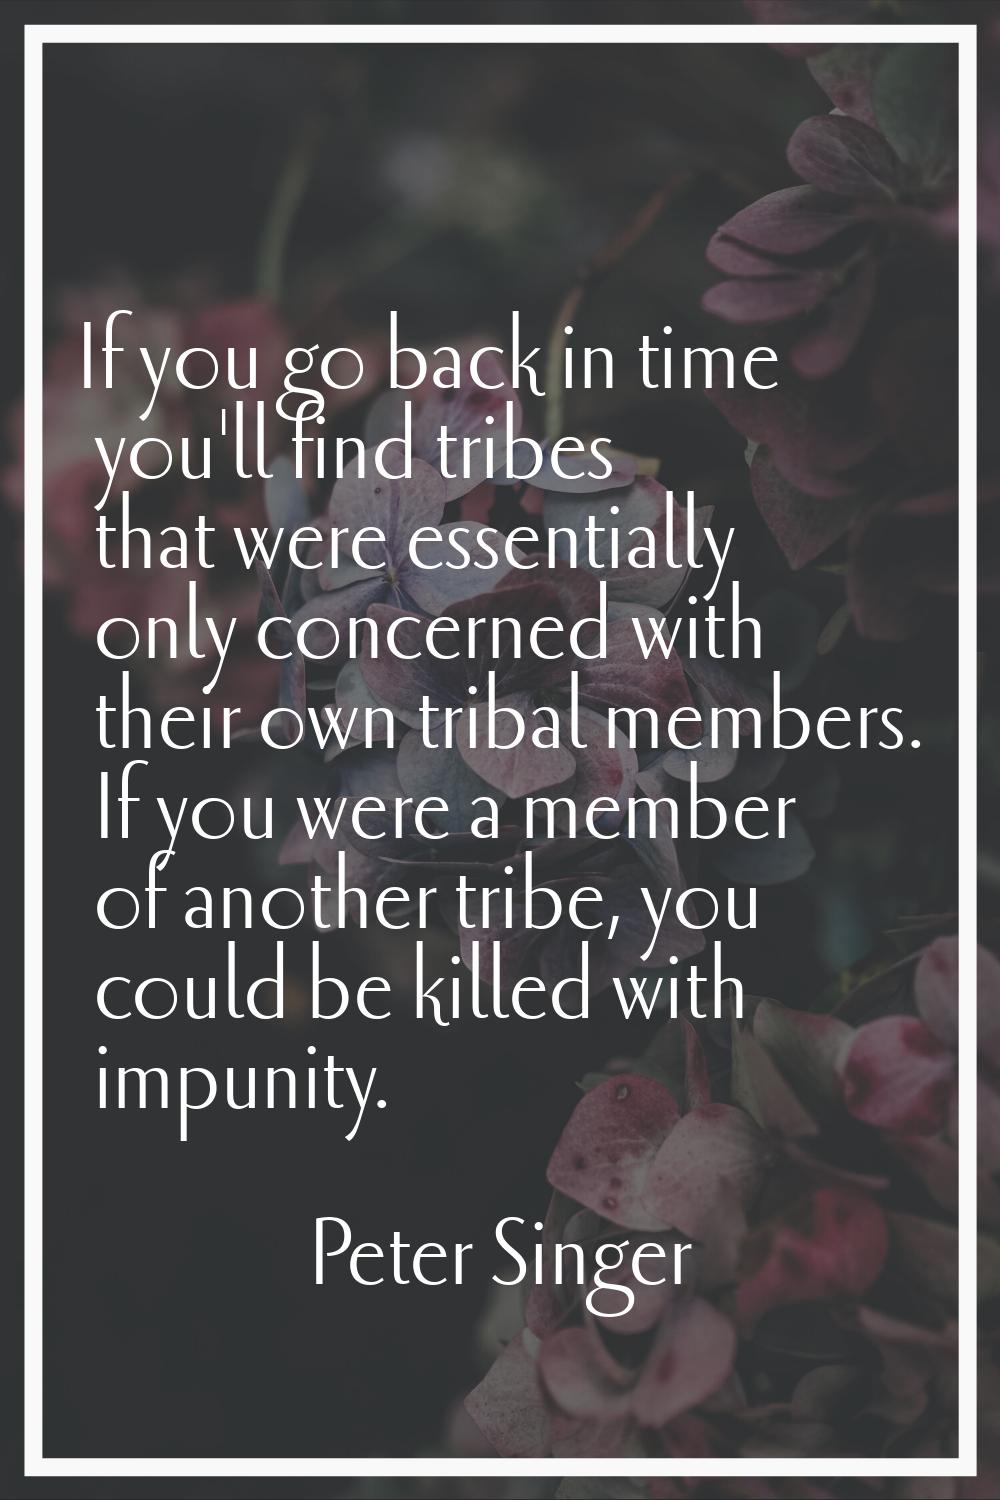 If you go back in time you'll find tribes that were essentially only concerned with their own triba